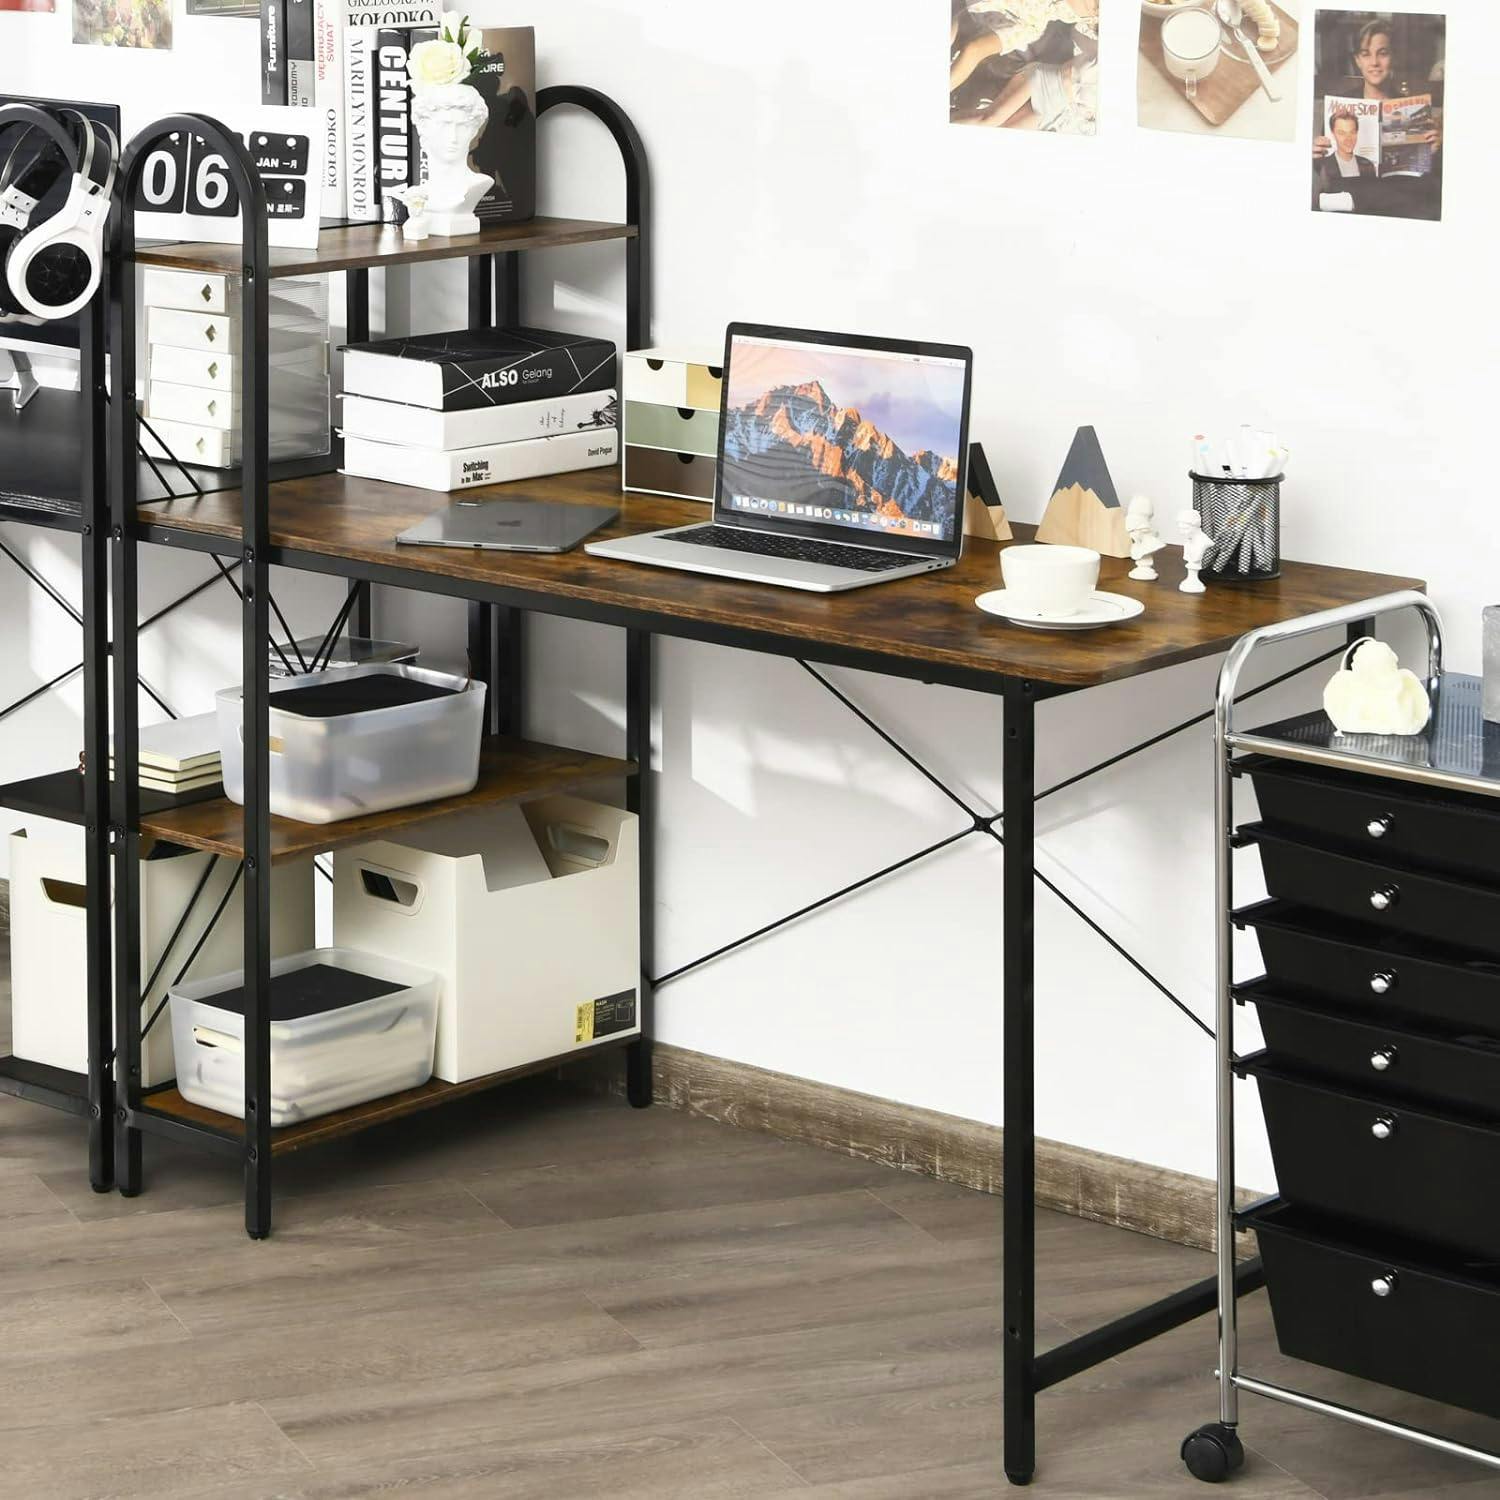 Rustic Brown 48'' Reversible Computer Desk with Metal Frame and Storage Shelves